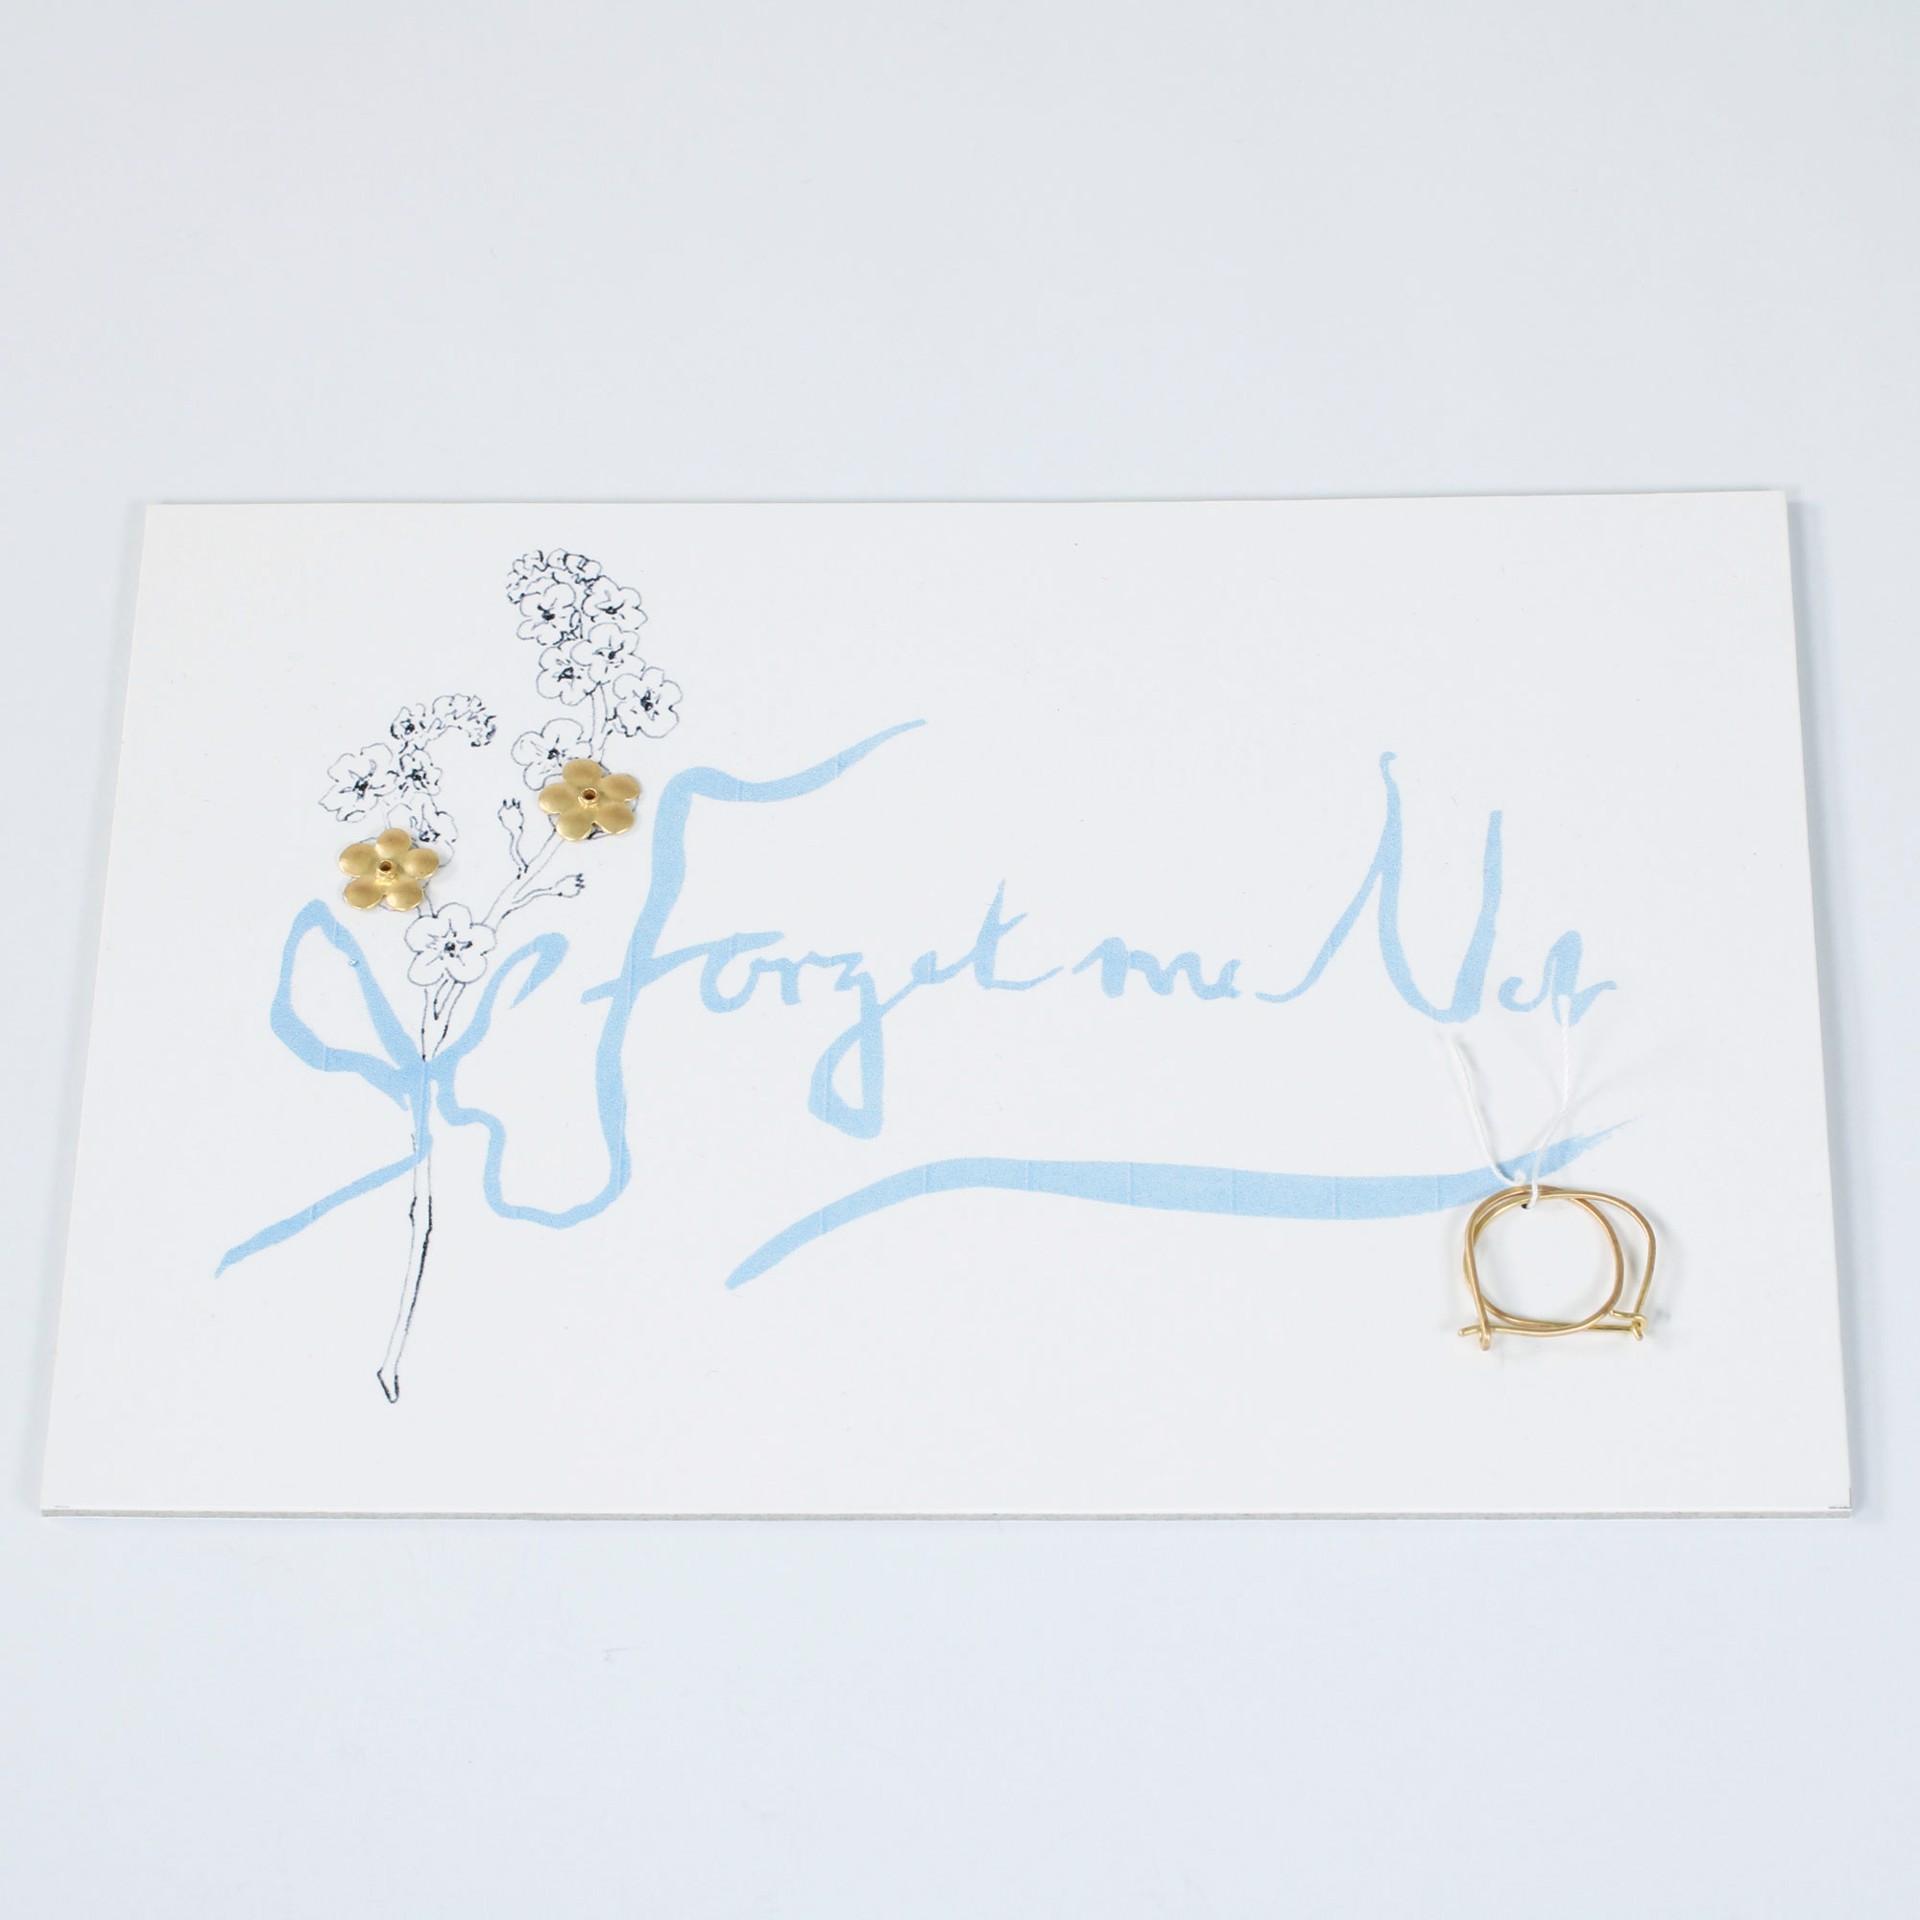 Golden Forget Me Not Earrings by Christopher Thompson-Royds